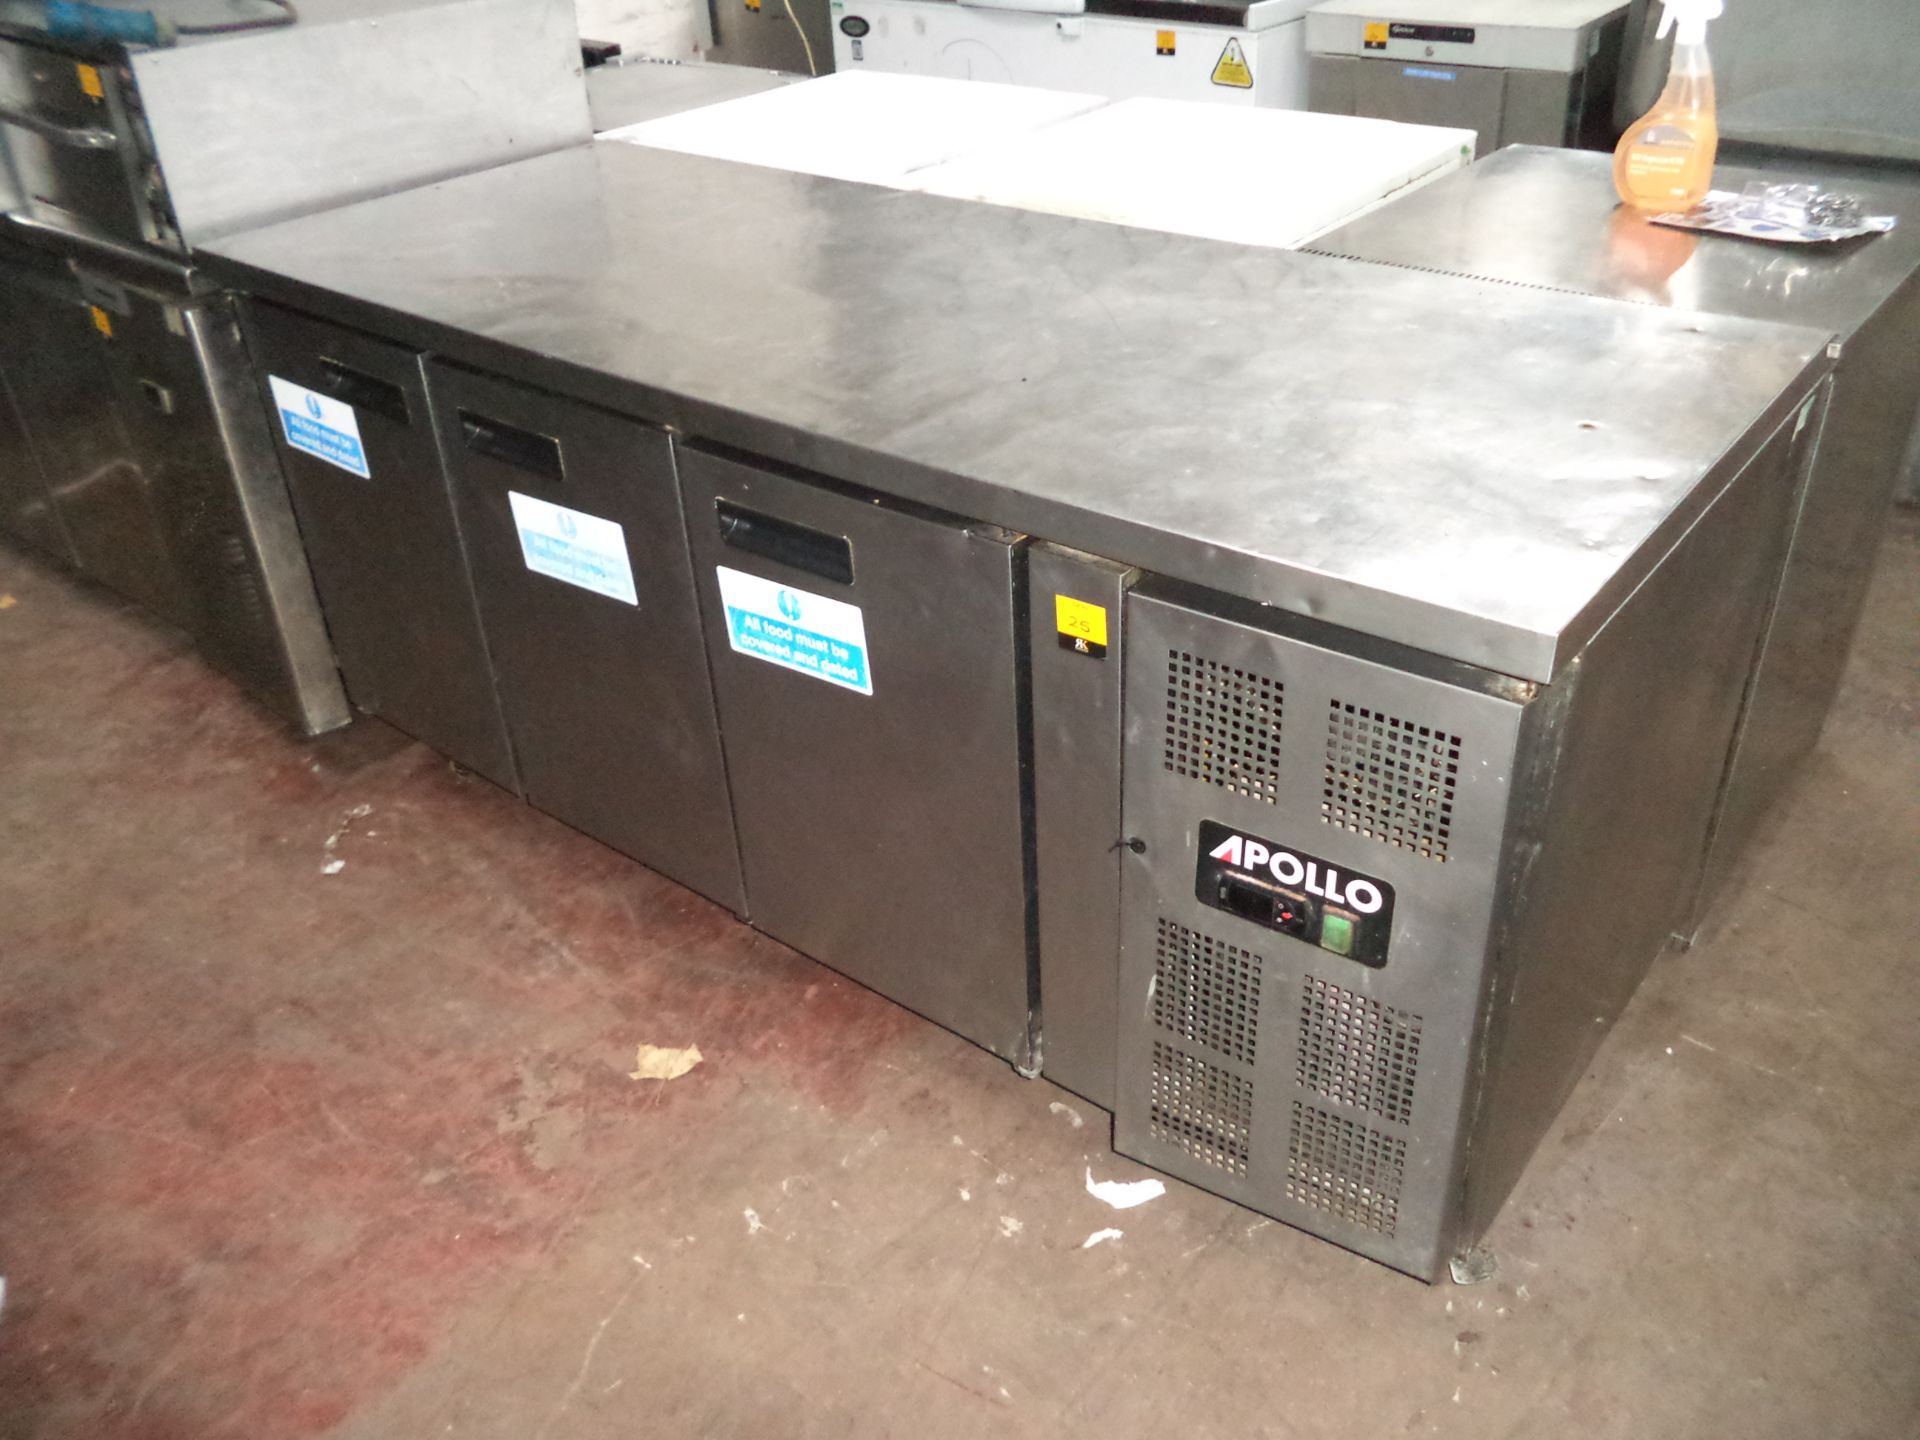 Apollo stainless steel large refrigerated prep cabinet with triple doors IMPORTANT: Please